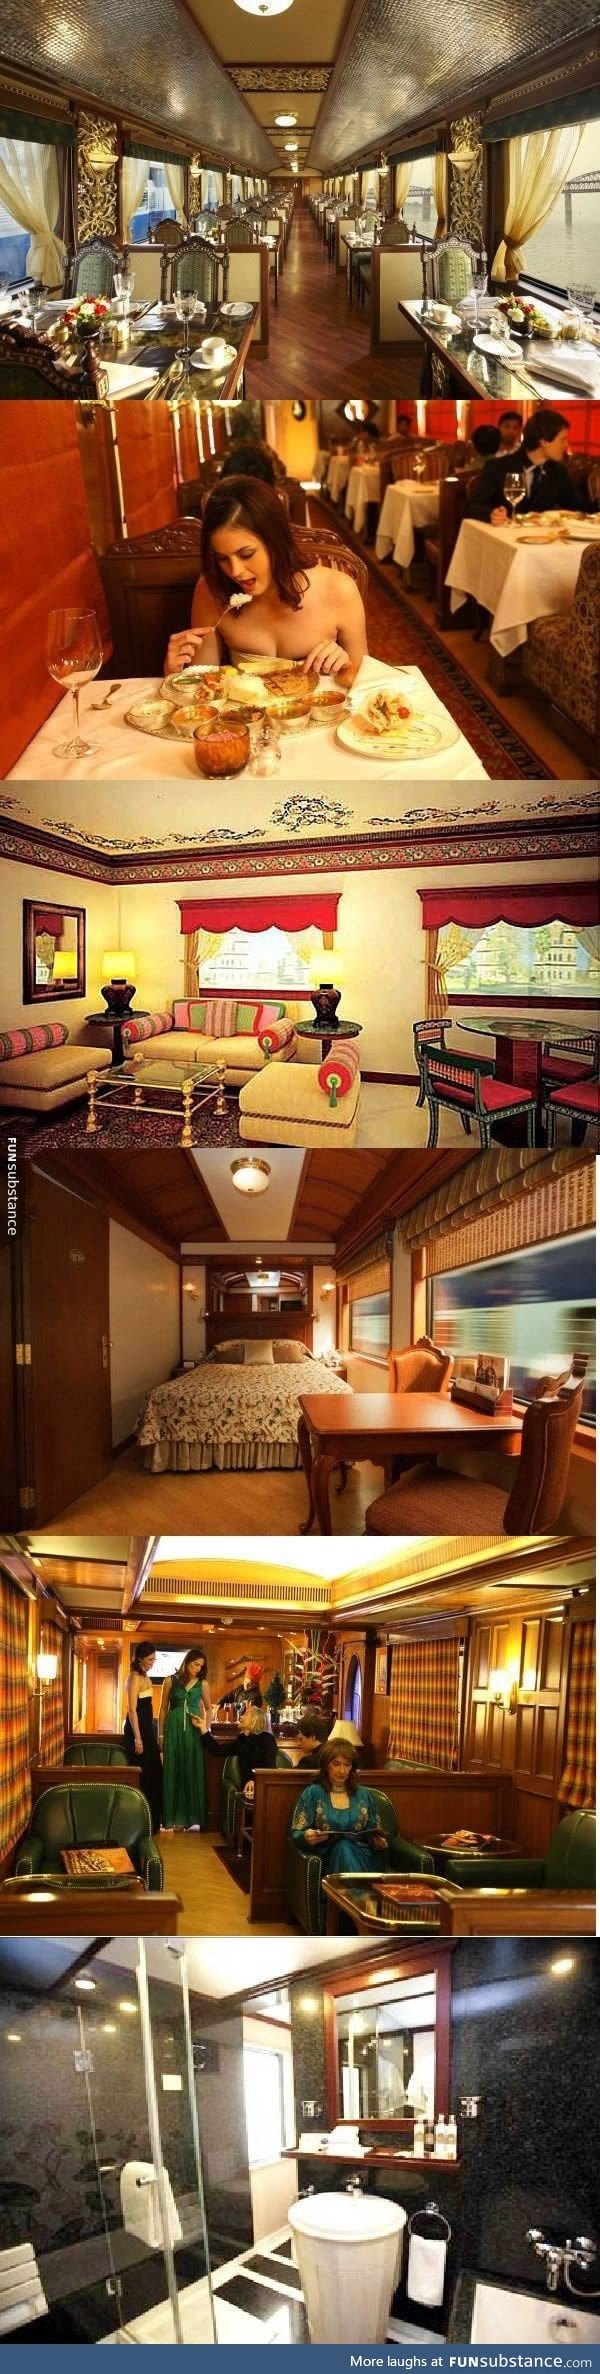 It's a train in India, THE MAHARAJAS EXPRESS!